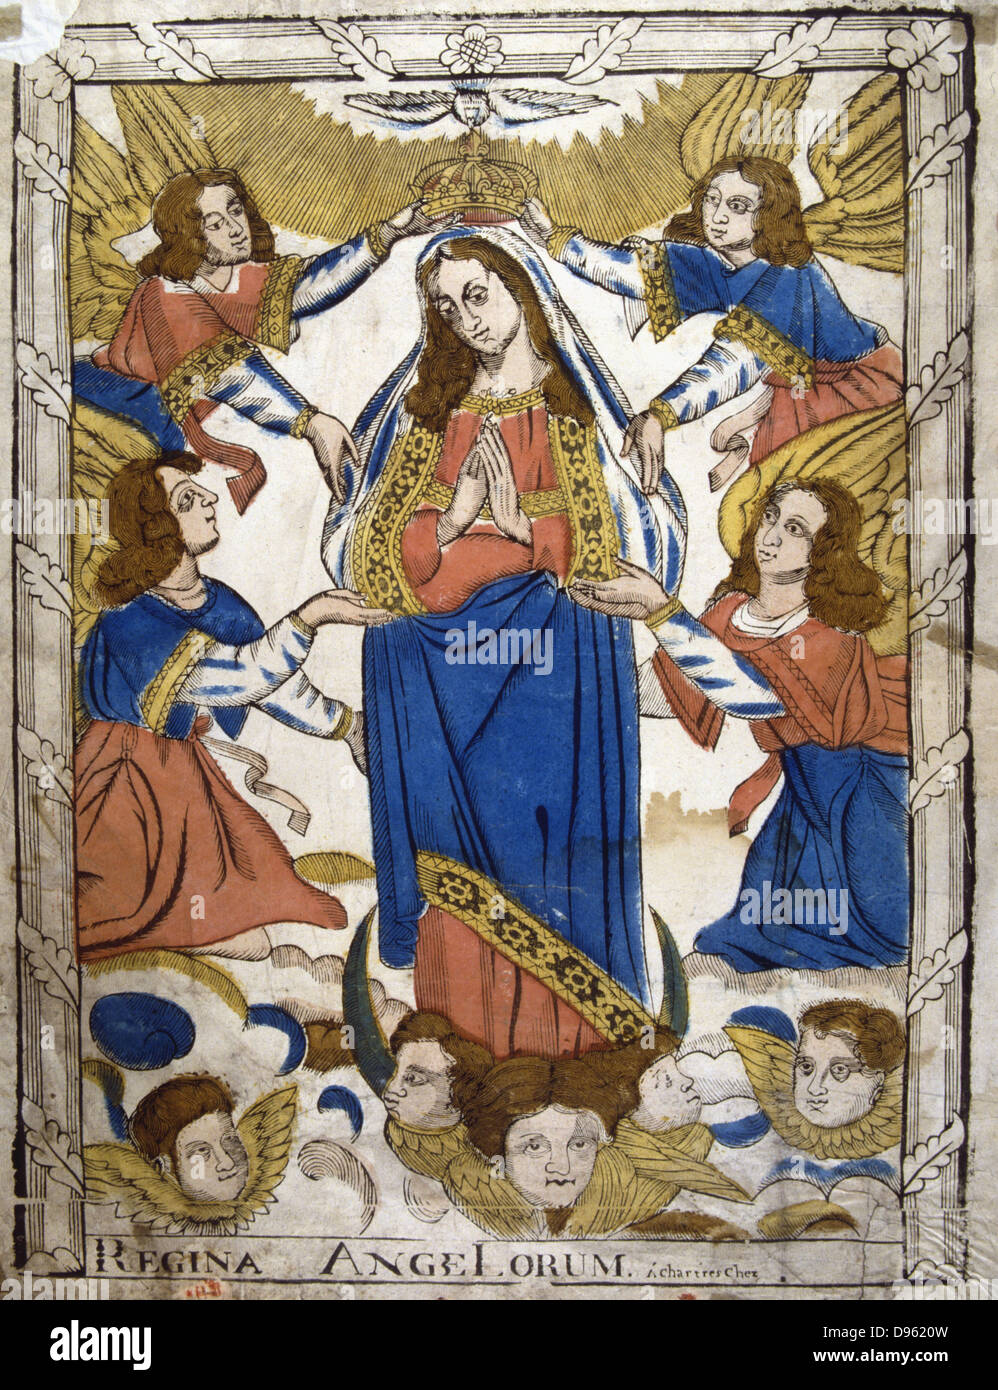 Coronation of the Virgin Mary. From 19th century French coloured woodcut. Stock Photo